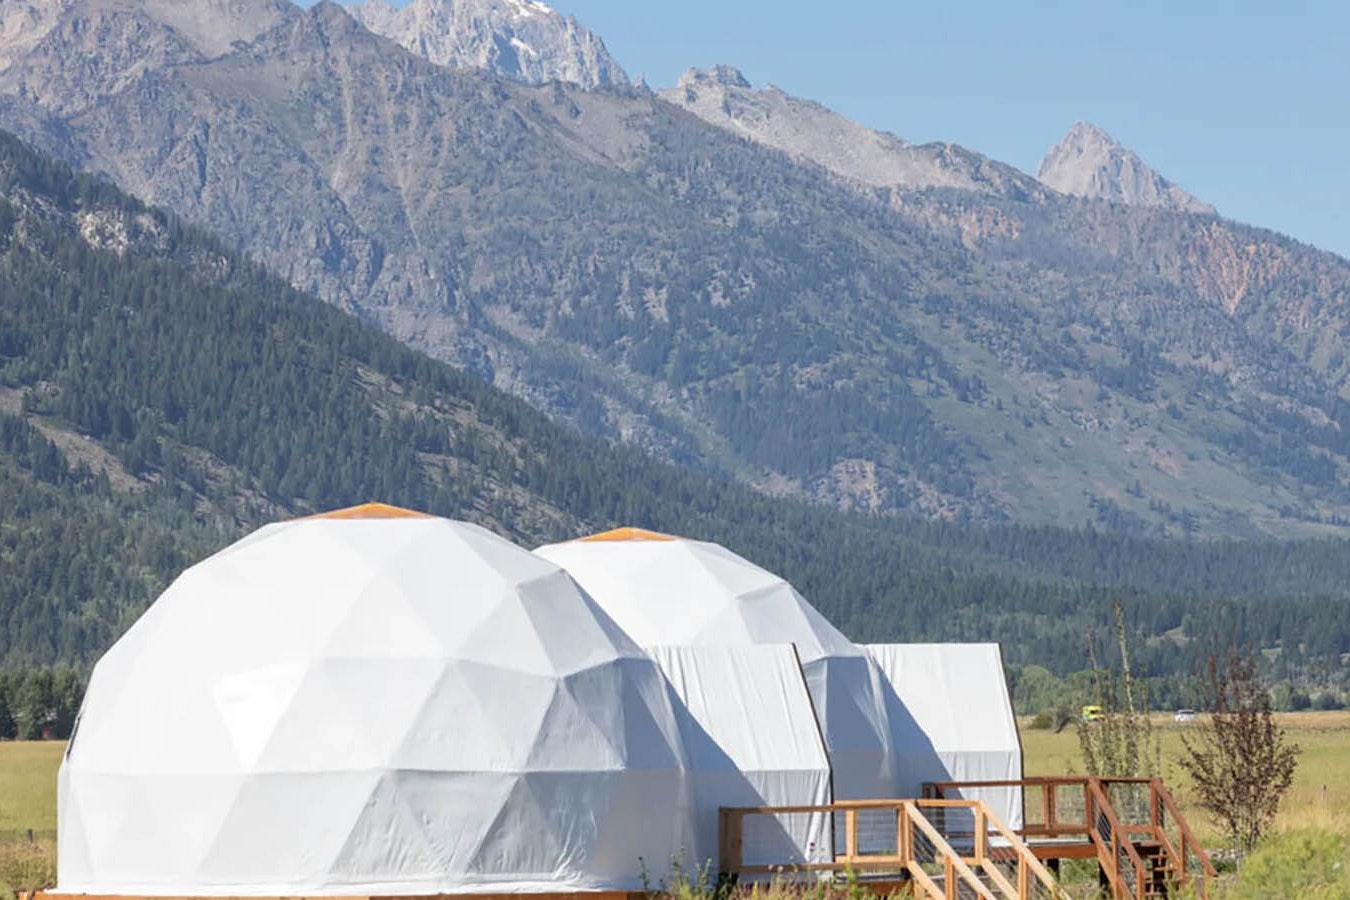 Glamping tents at the base of the Tetons in affluent Teton County, Wyoming.